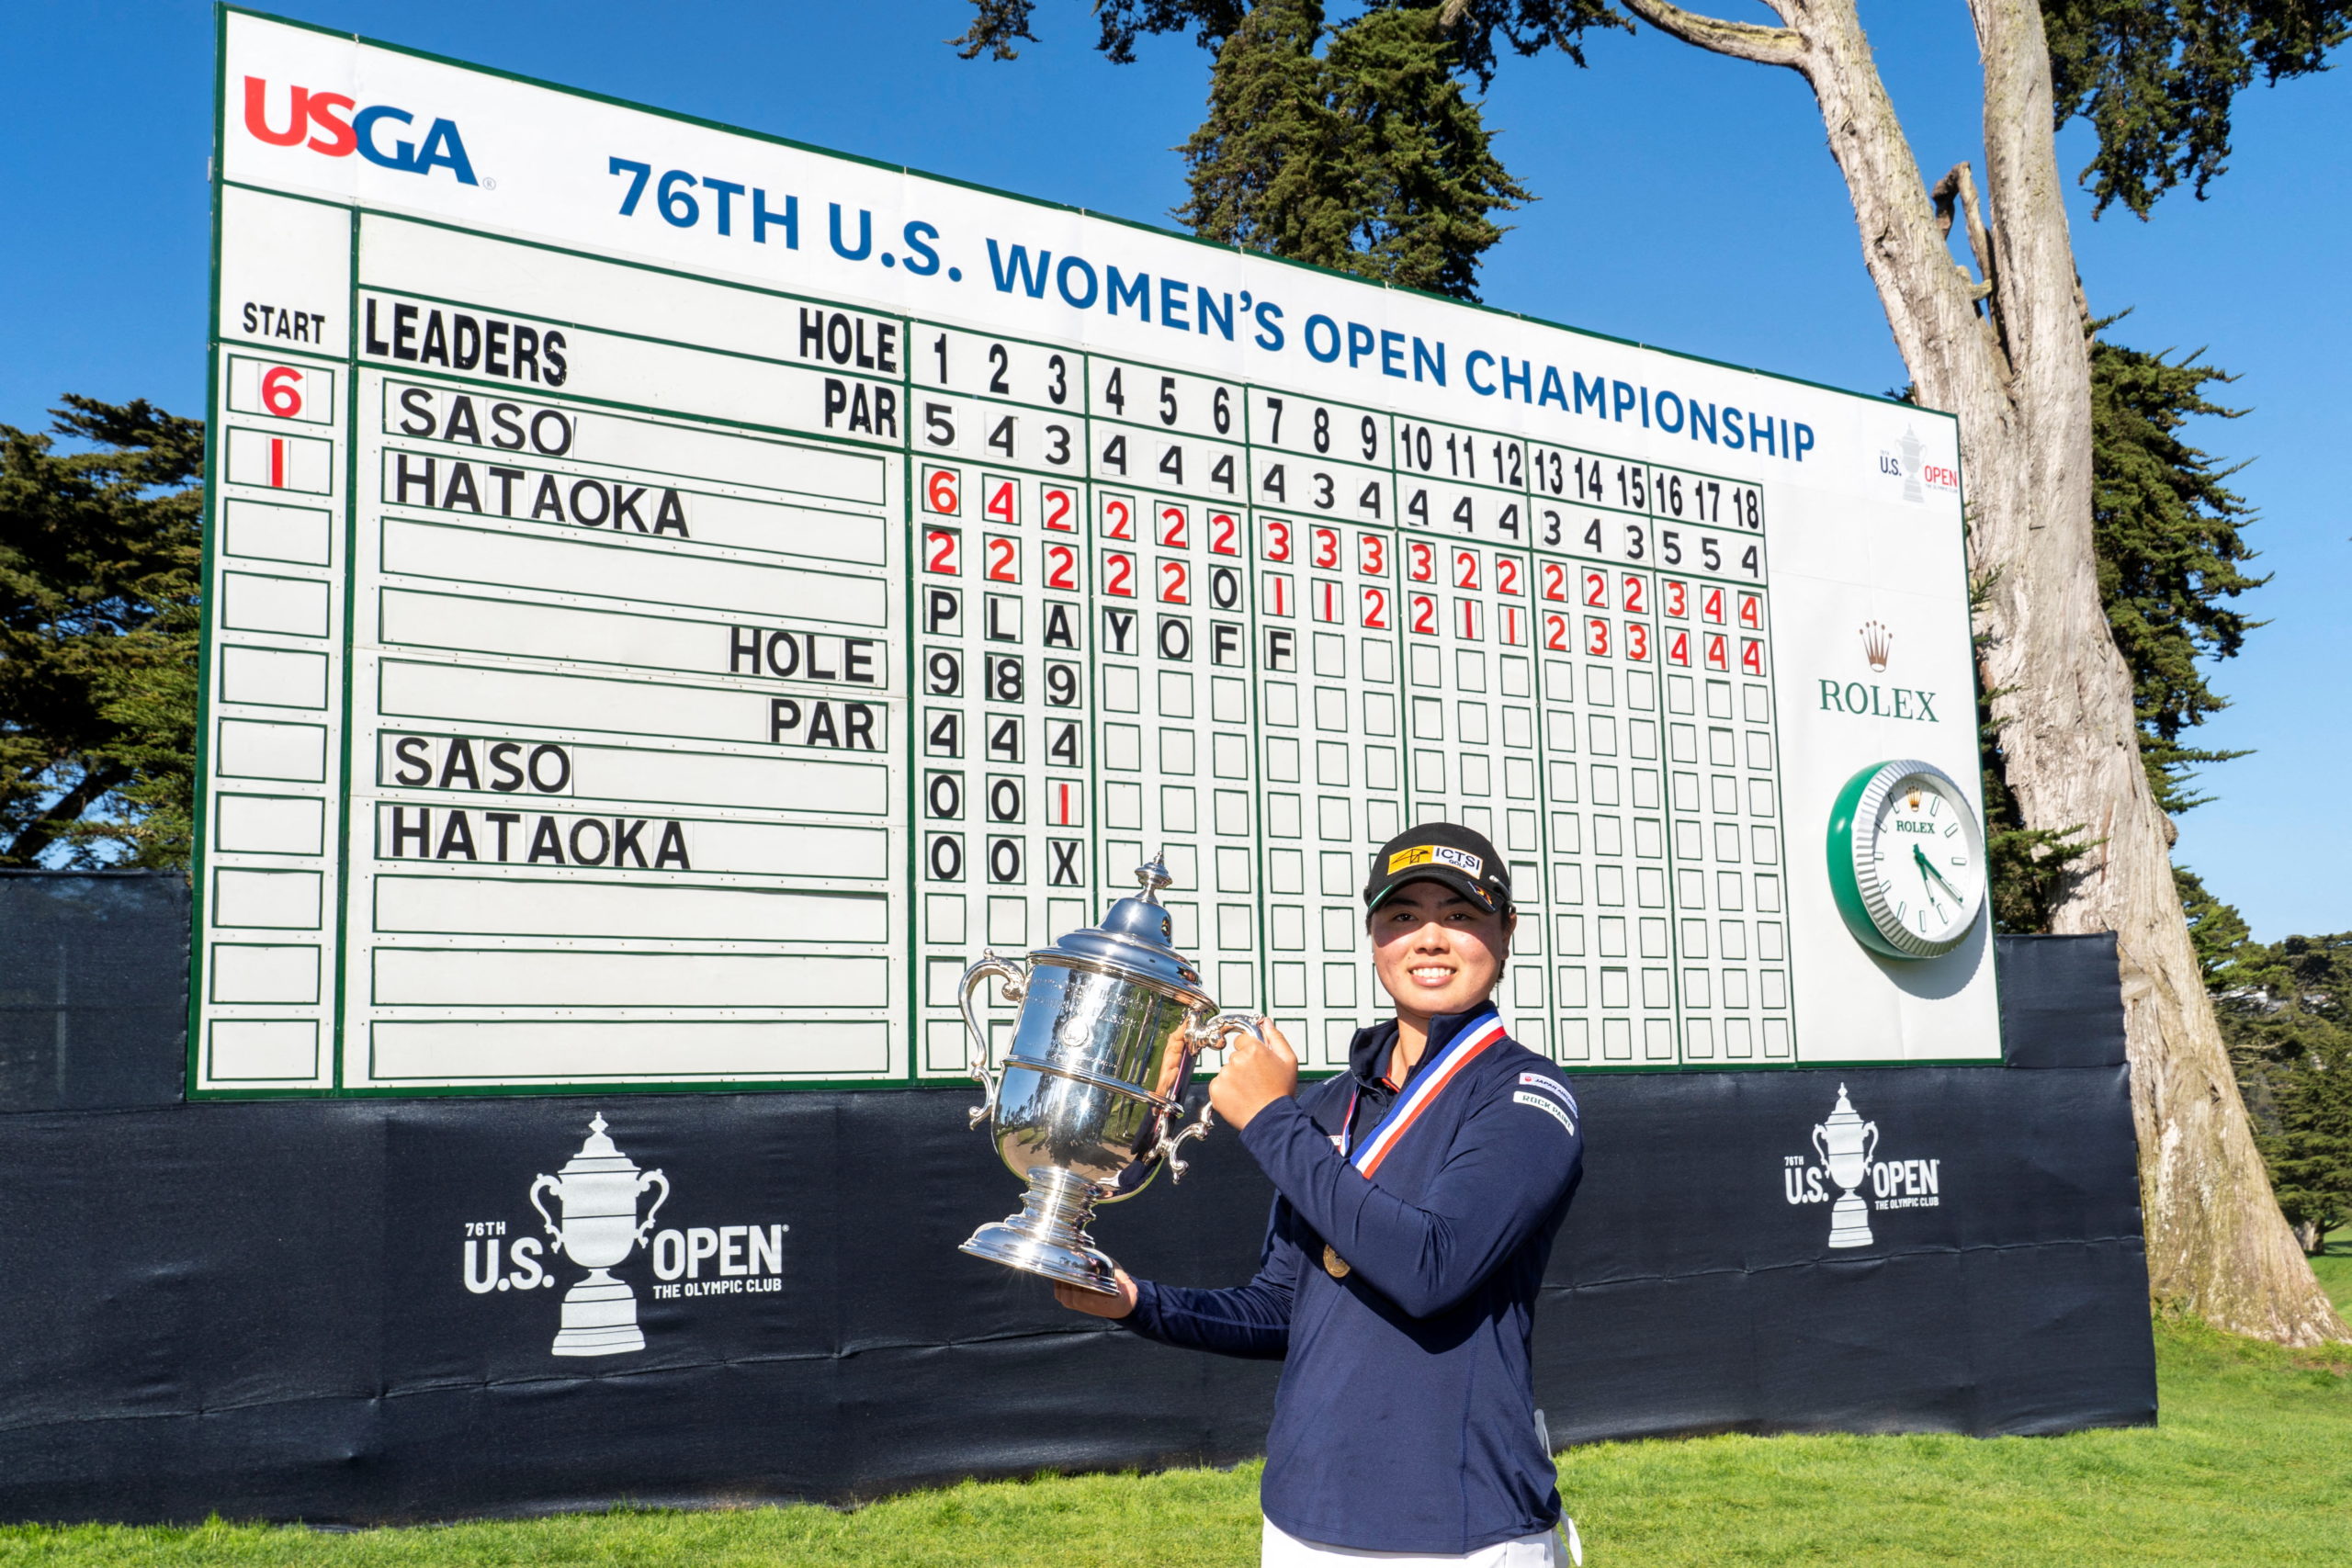 FILE PHOTO: Jun 6, 2021; San Francisco, California, USA; Yuka Saso hoists the US Open trophy after winning in a sudden death playoff over Nasa Hataoka following the final round of the U.S. Women's Open golf tournament at The Olympic Club.